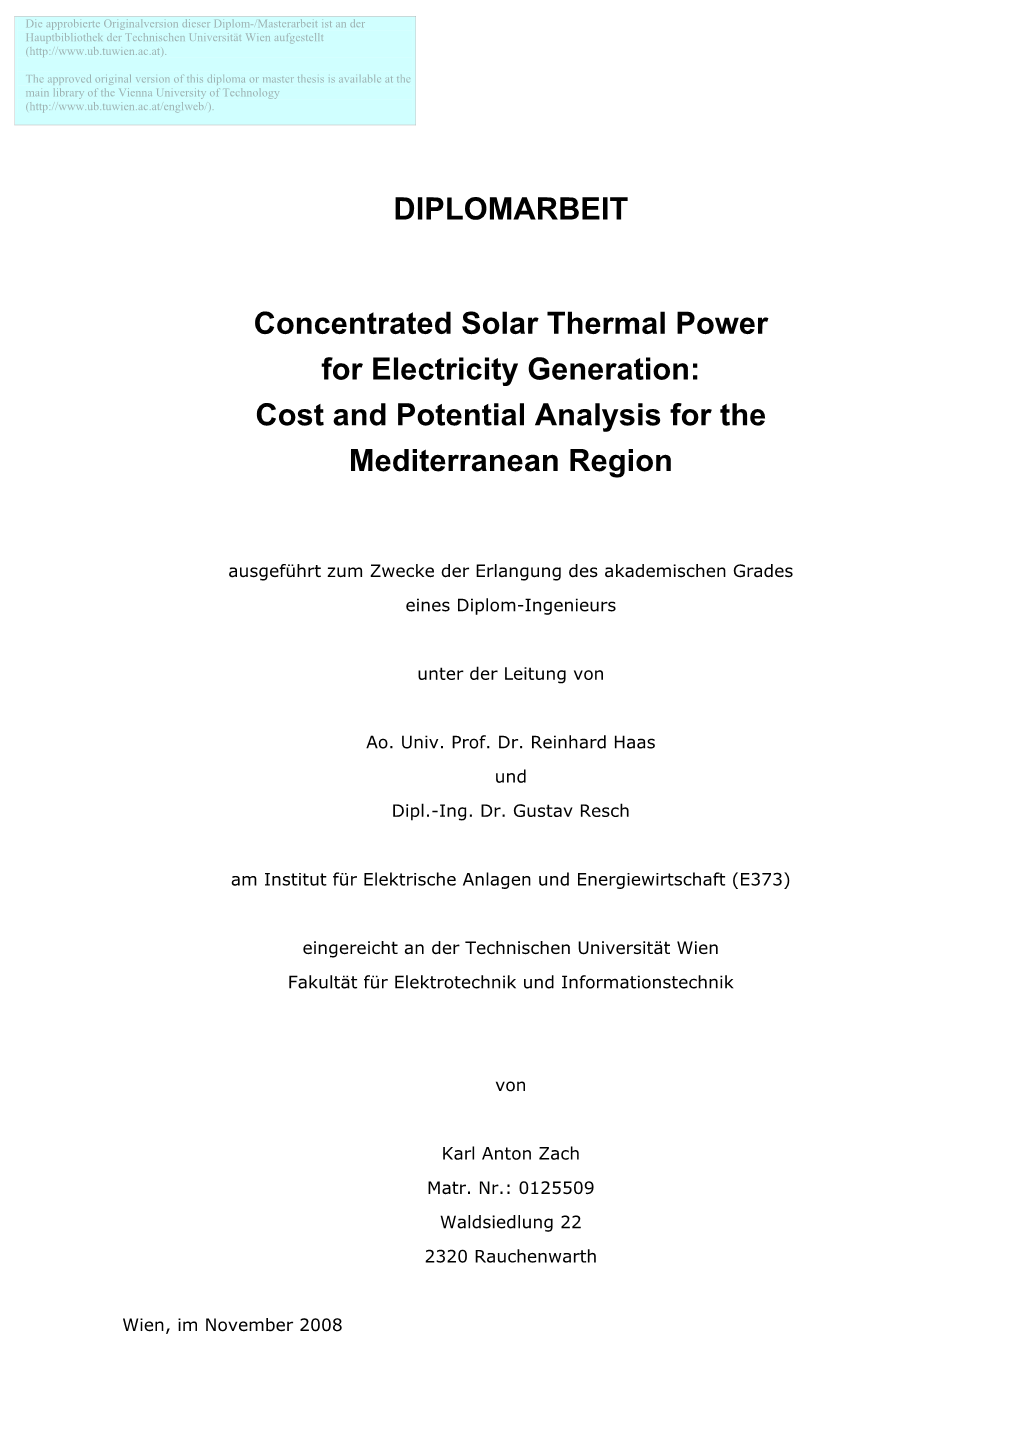 DIPLOMARBEIT Concentrated Solar Thermal Power For